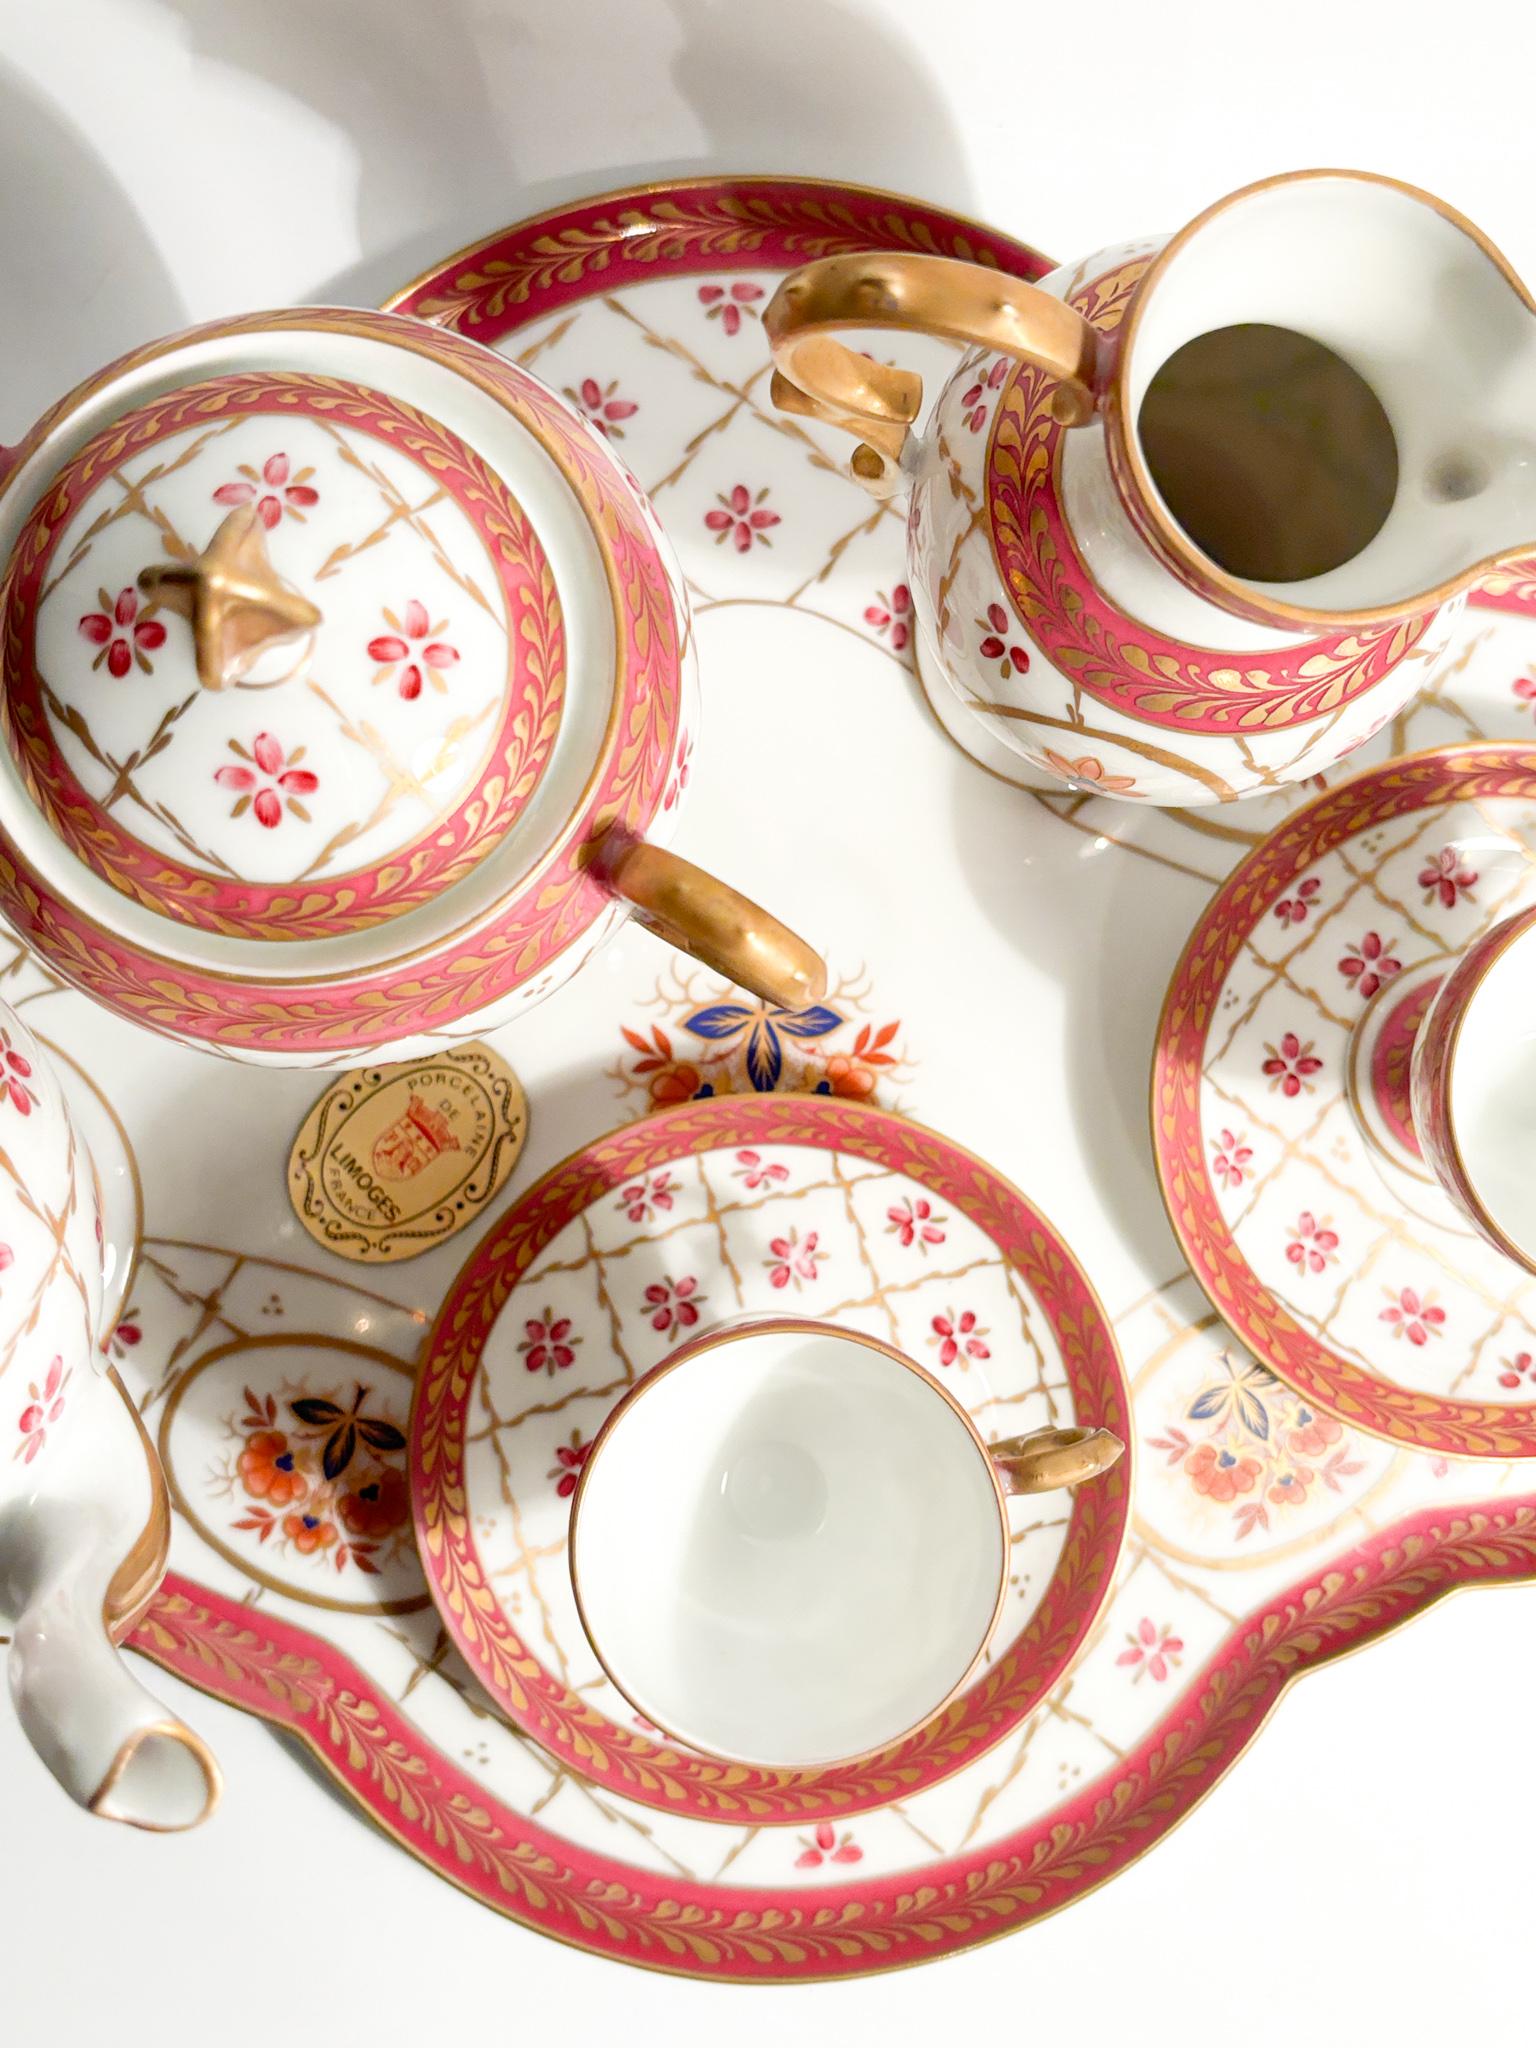 Art Deco Tête-à-tête Coffee Set in Limoges Porcelain from the 1950s